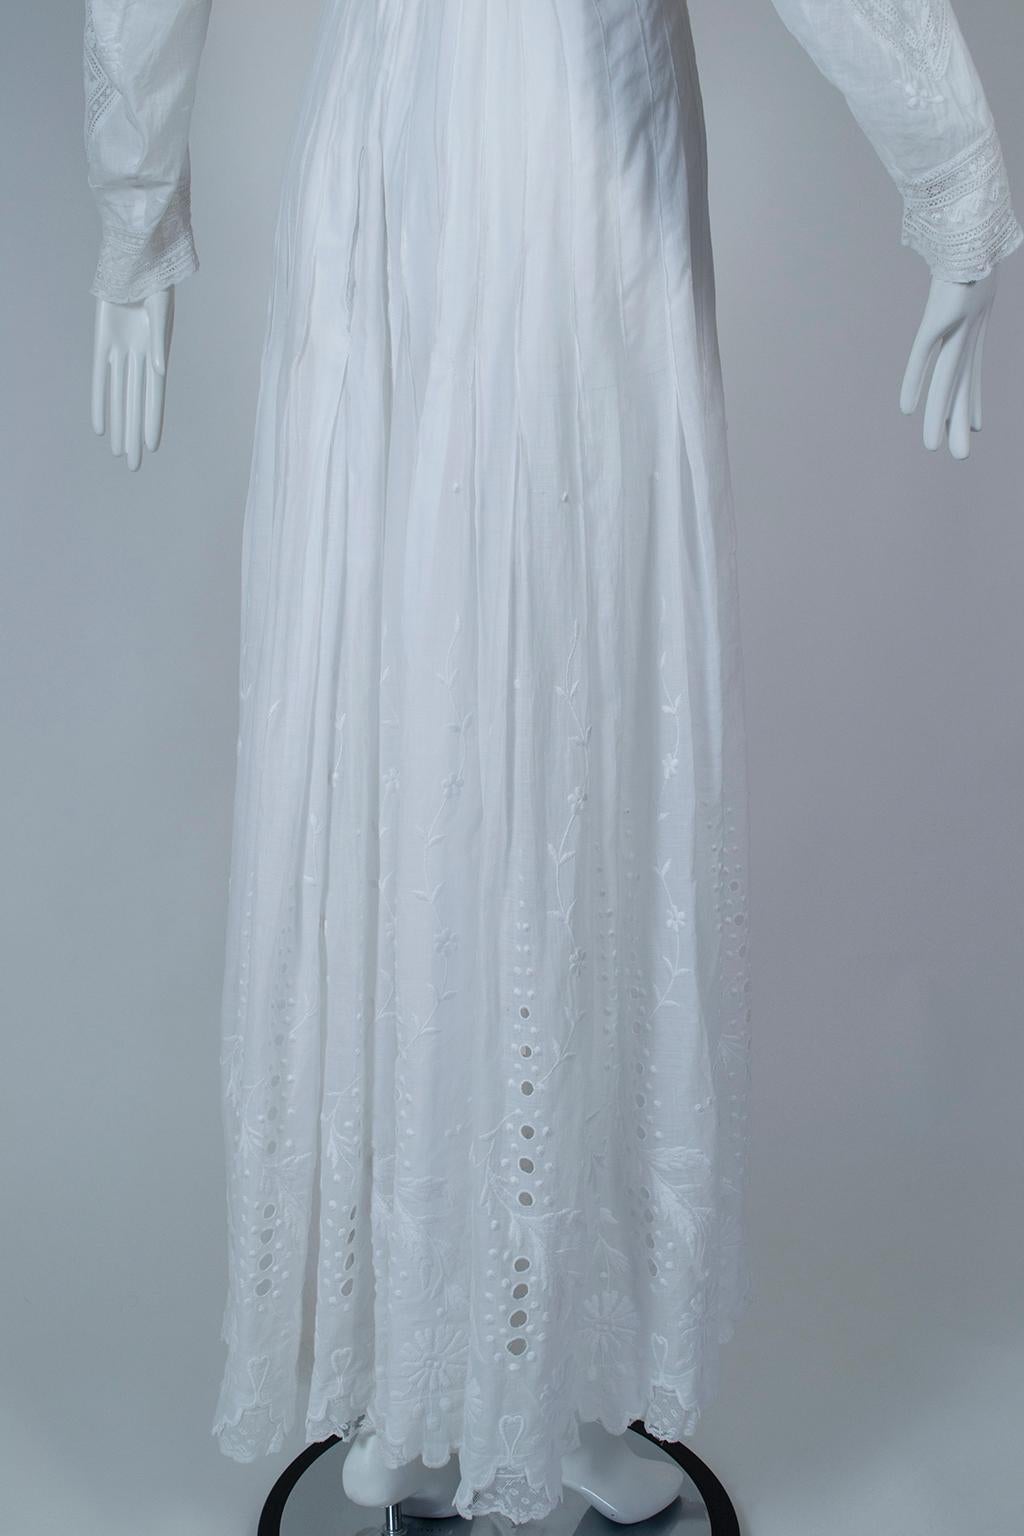 Victorian White Eyelet and Lace Shoulder Pleat Afternoon Tea Dress - M, 1880s 6